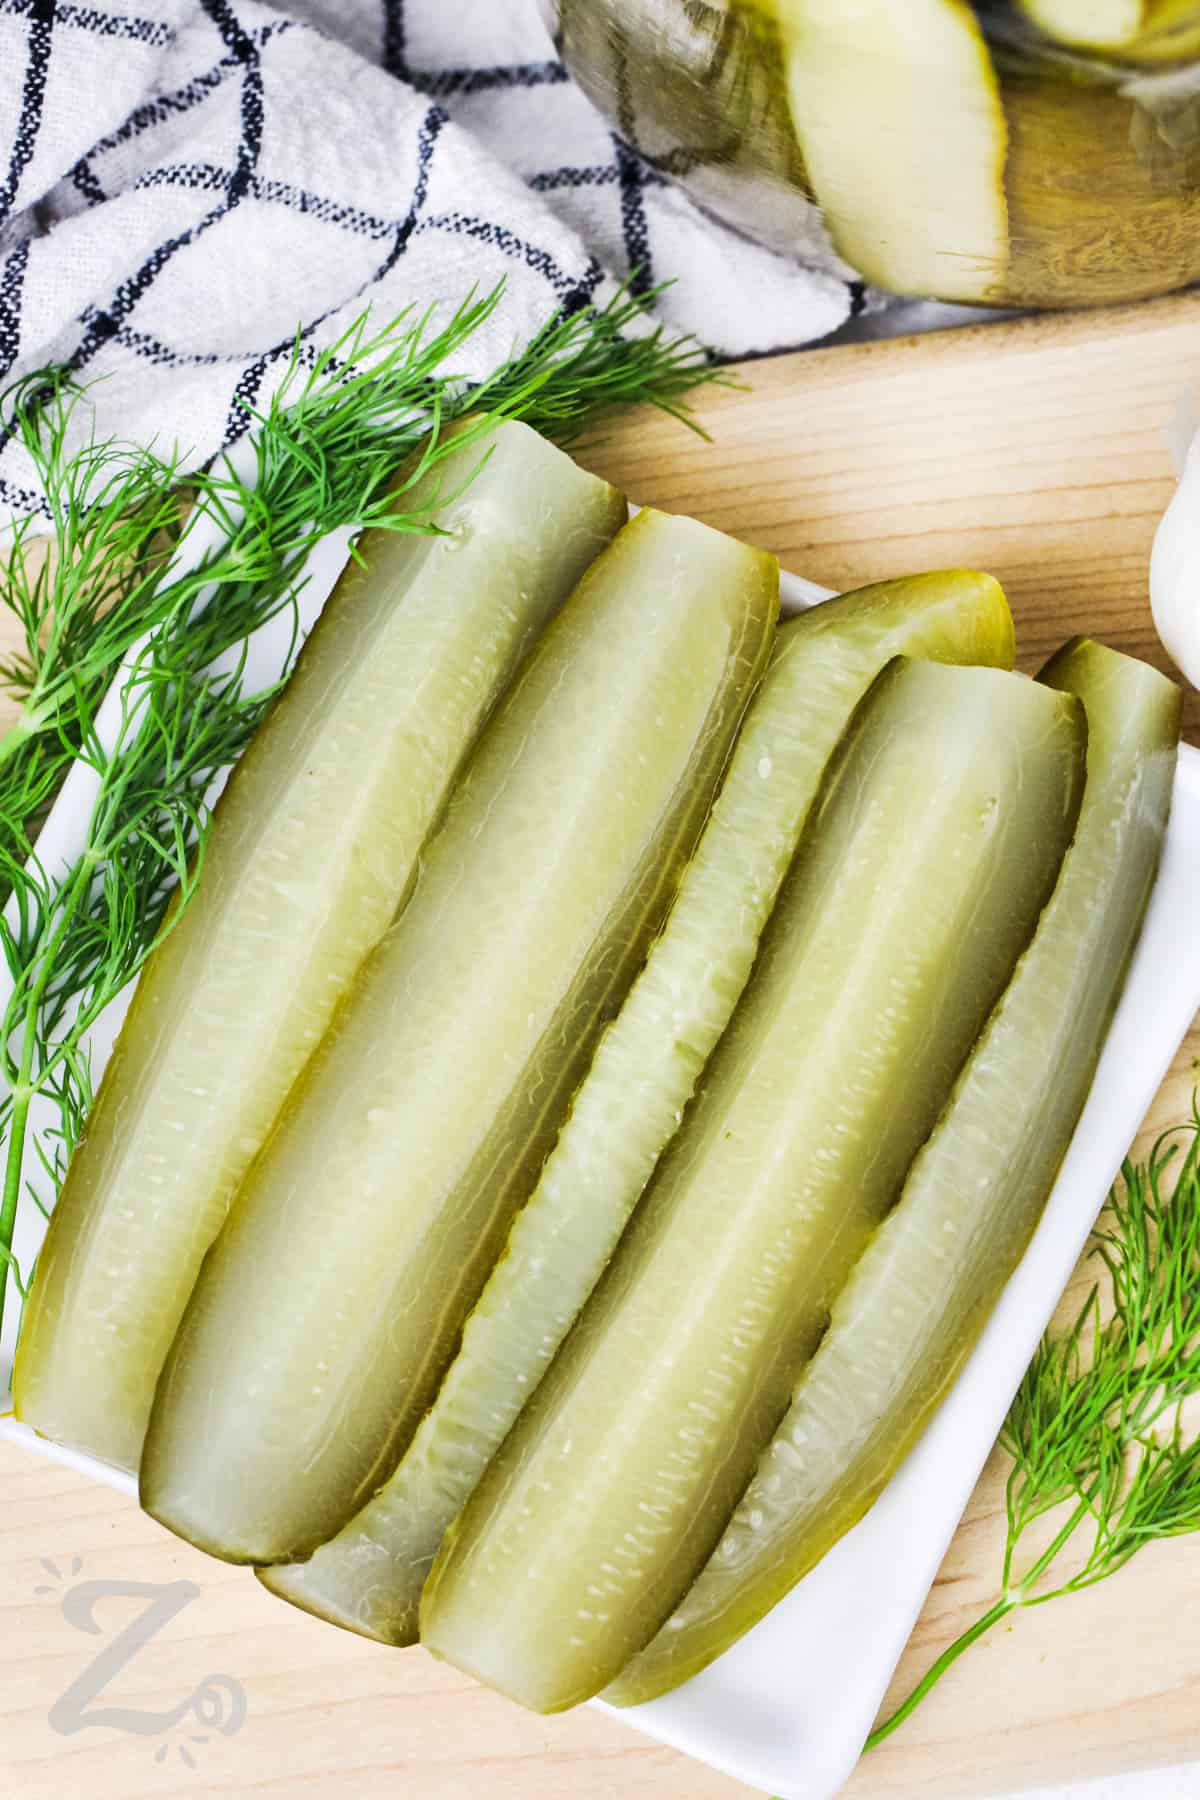 sliced dill pickles on a serving plate.